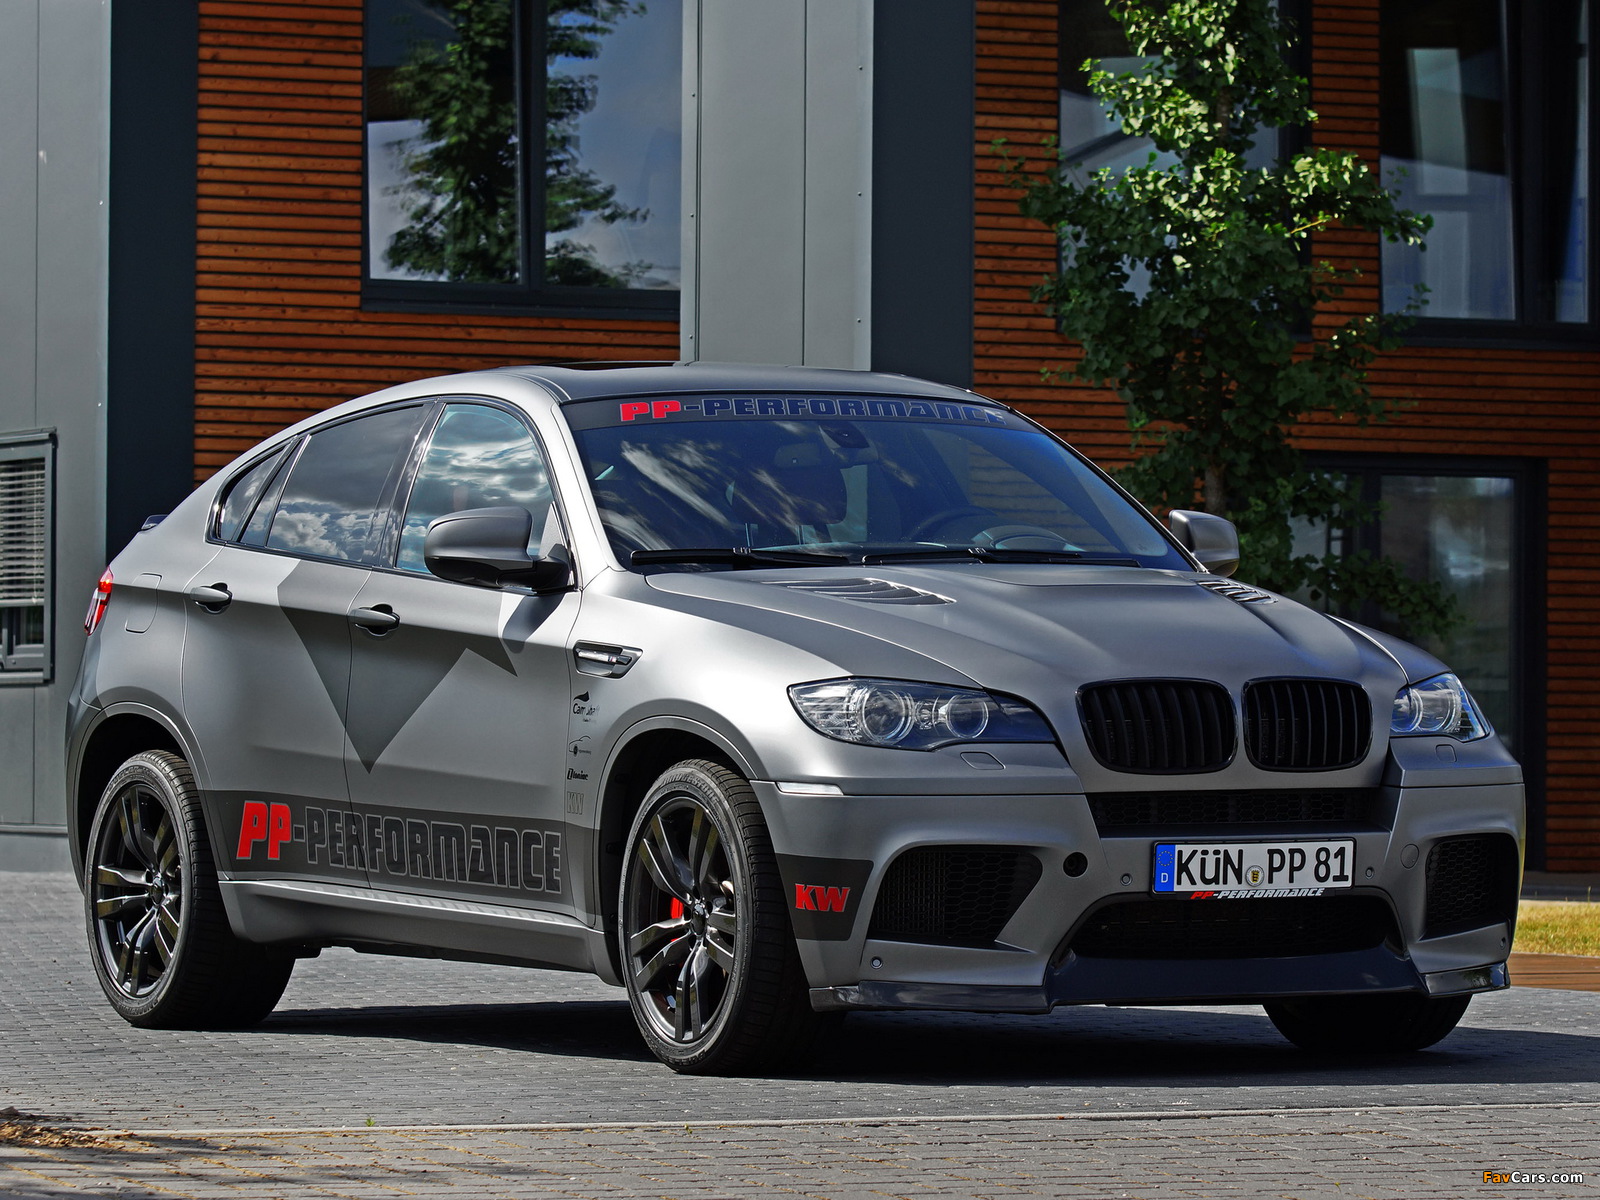 PP-Performance BMW X6 M (E71) 2013 wallpapers (1600 x 1200)